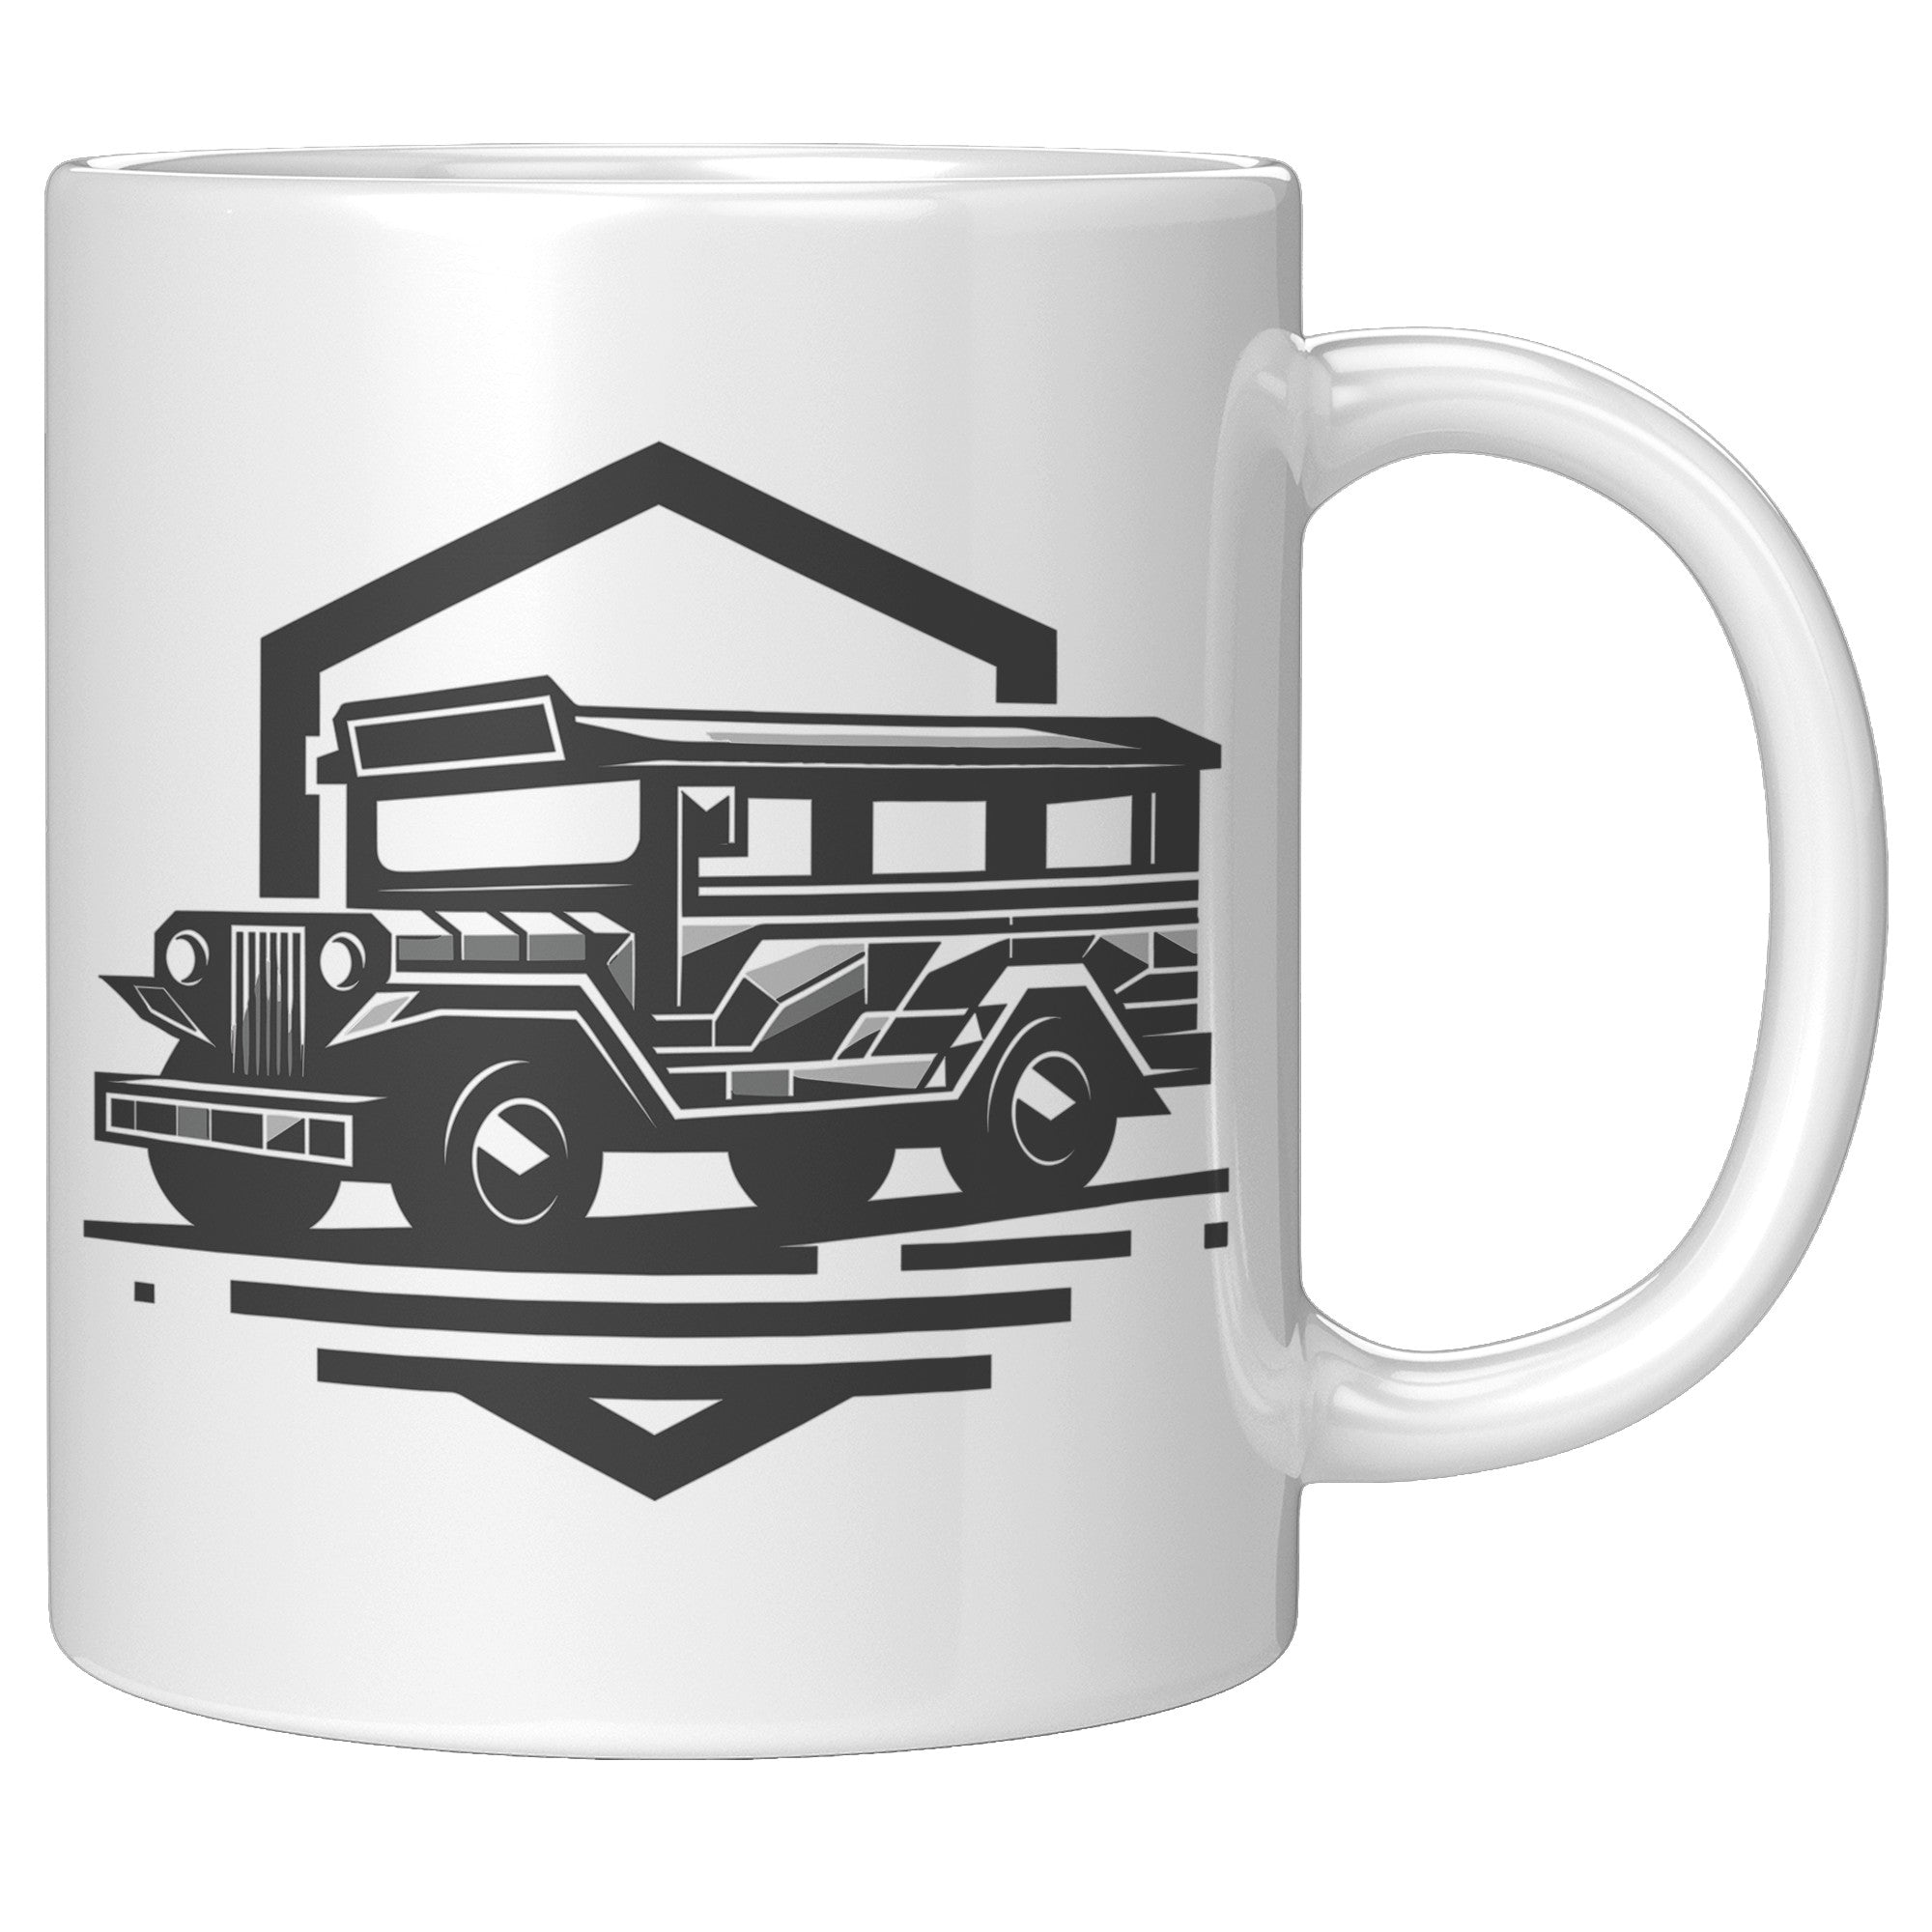 Iconic Jeepney Coffee Mug - Celebrate Filipino Culture - Unique Philippines-Inspired Cup - Perfect Gift for Pinoy Pride! - B